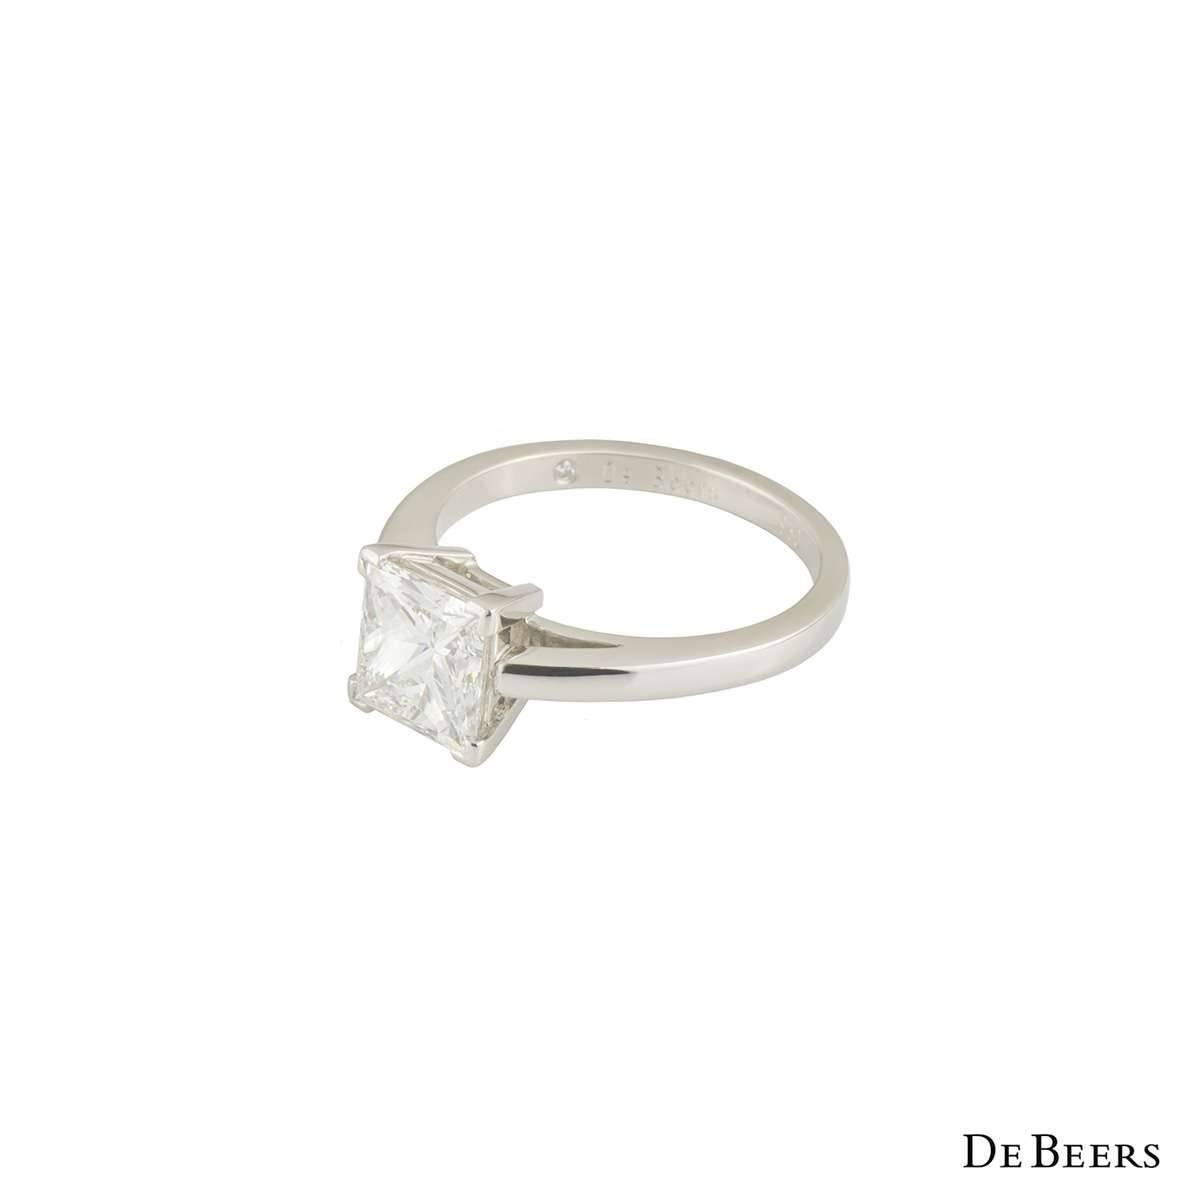 A luxurious platinum De Beers diamond ring from the Classic Princess Cut collection. The ring comprises of a princess cut diamond in a 4 claw setting with a weight of 2.50ct, G colour and VVS1 clarity. The ring is currently a UK size Q and US size